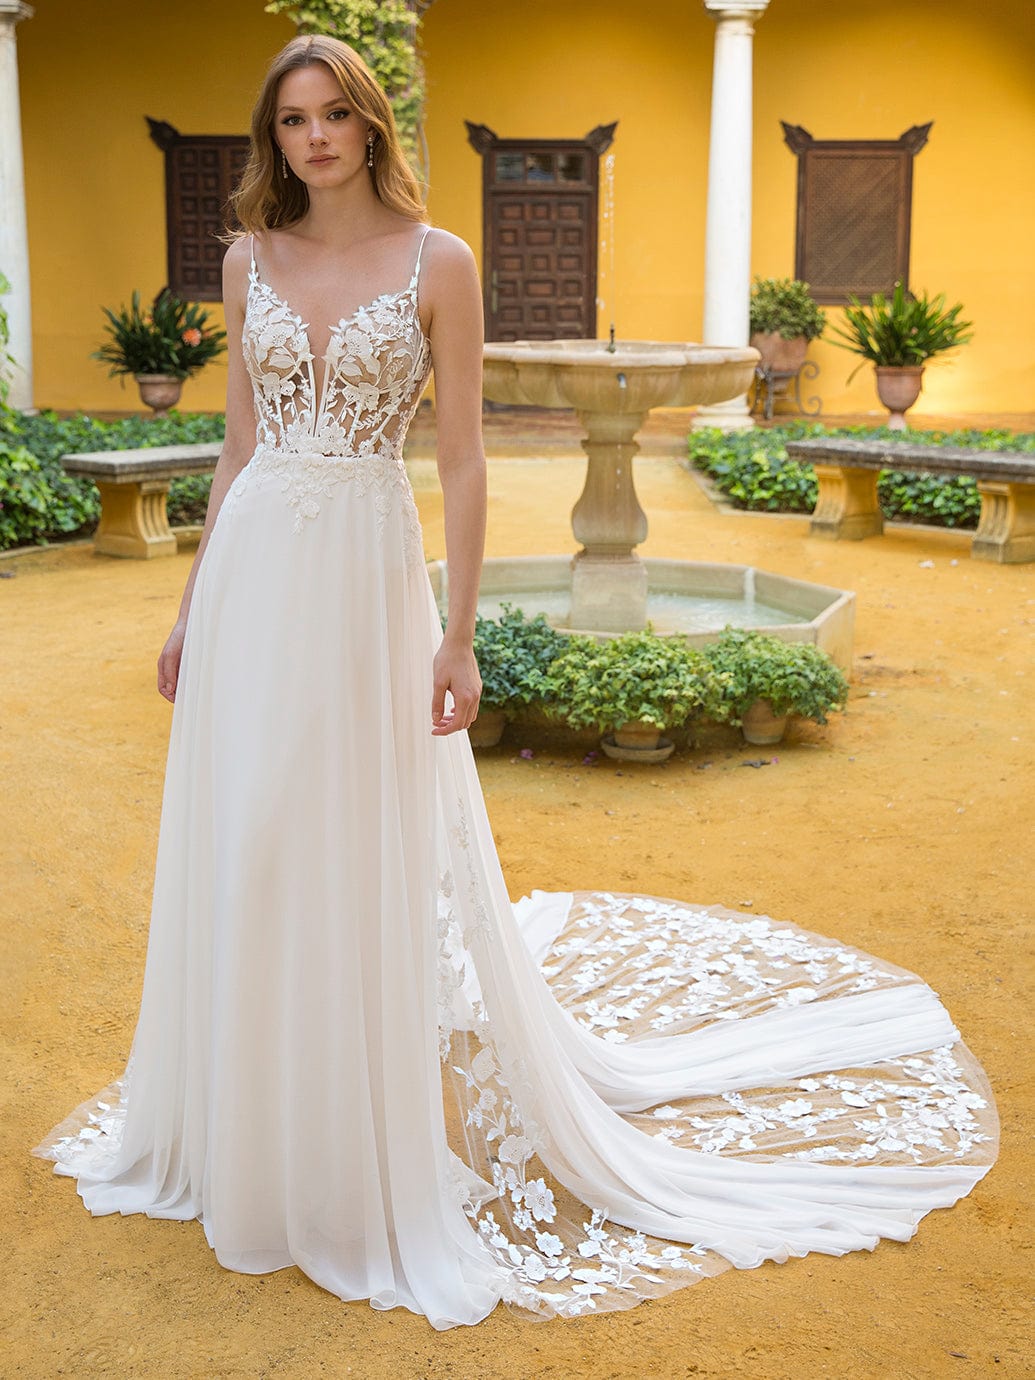 Glamorous Body-Hugging Wedding Dress with Sequins and High Slit | Marelli  Exclusive